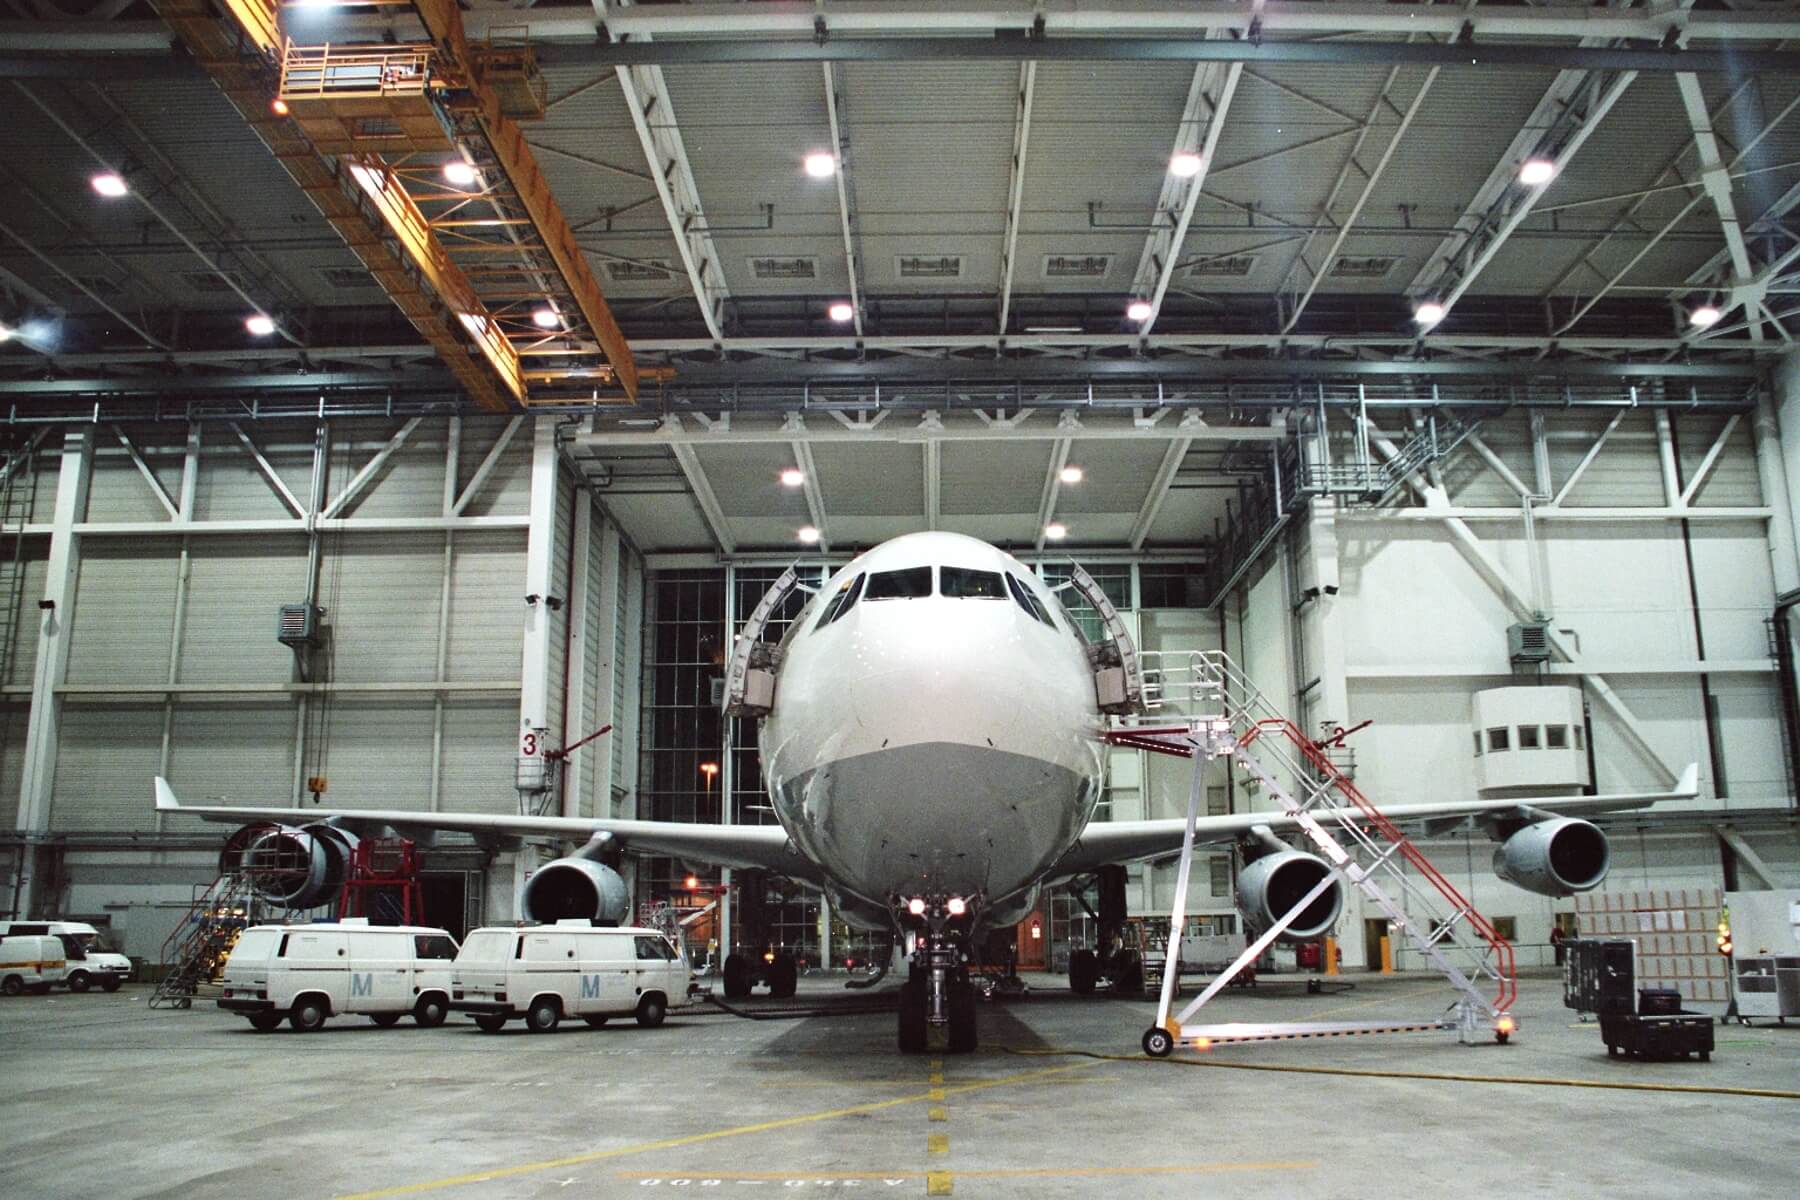 How often do airplanes get maintenance?